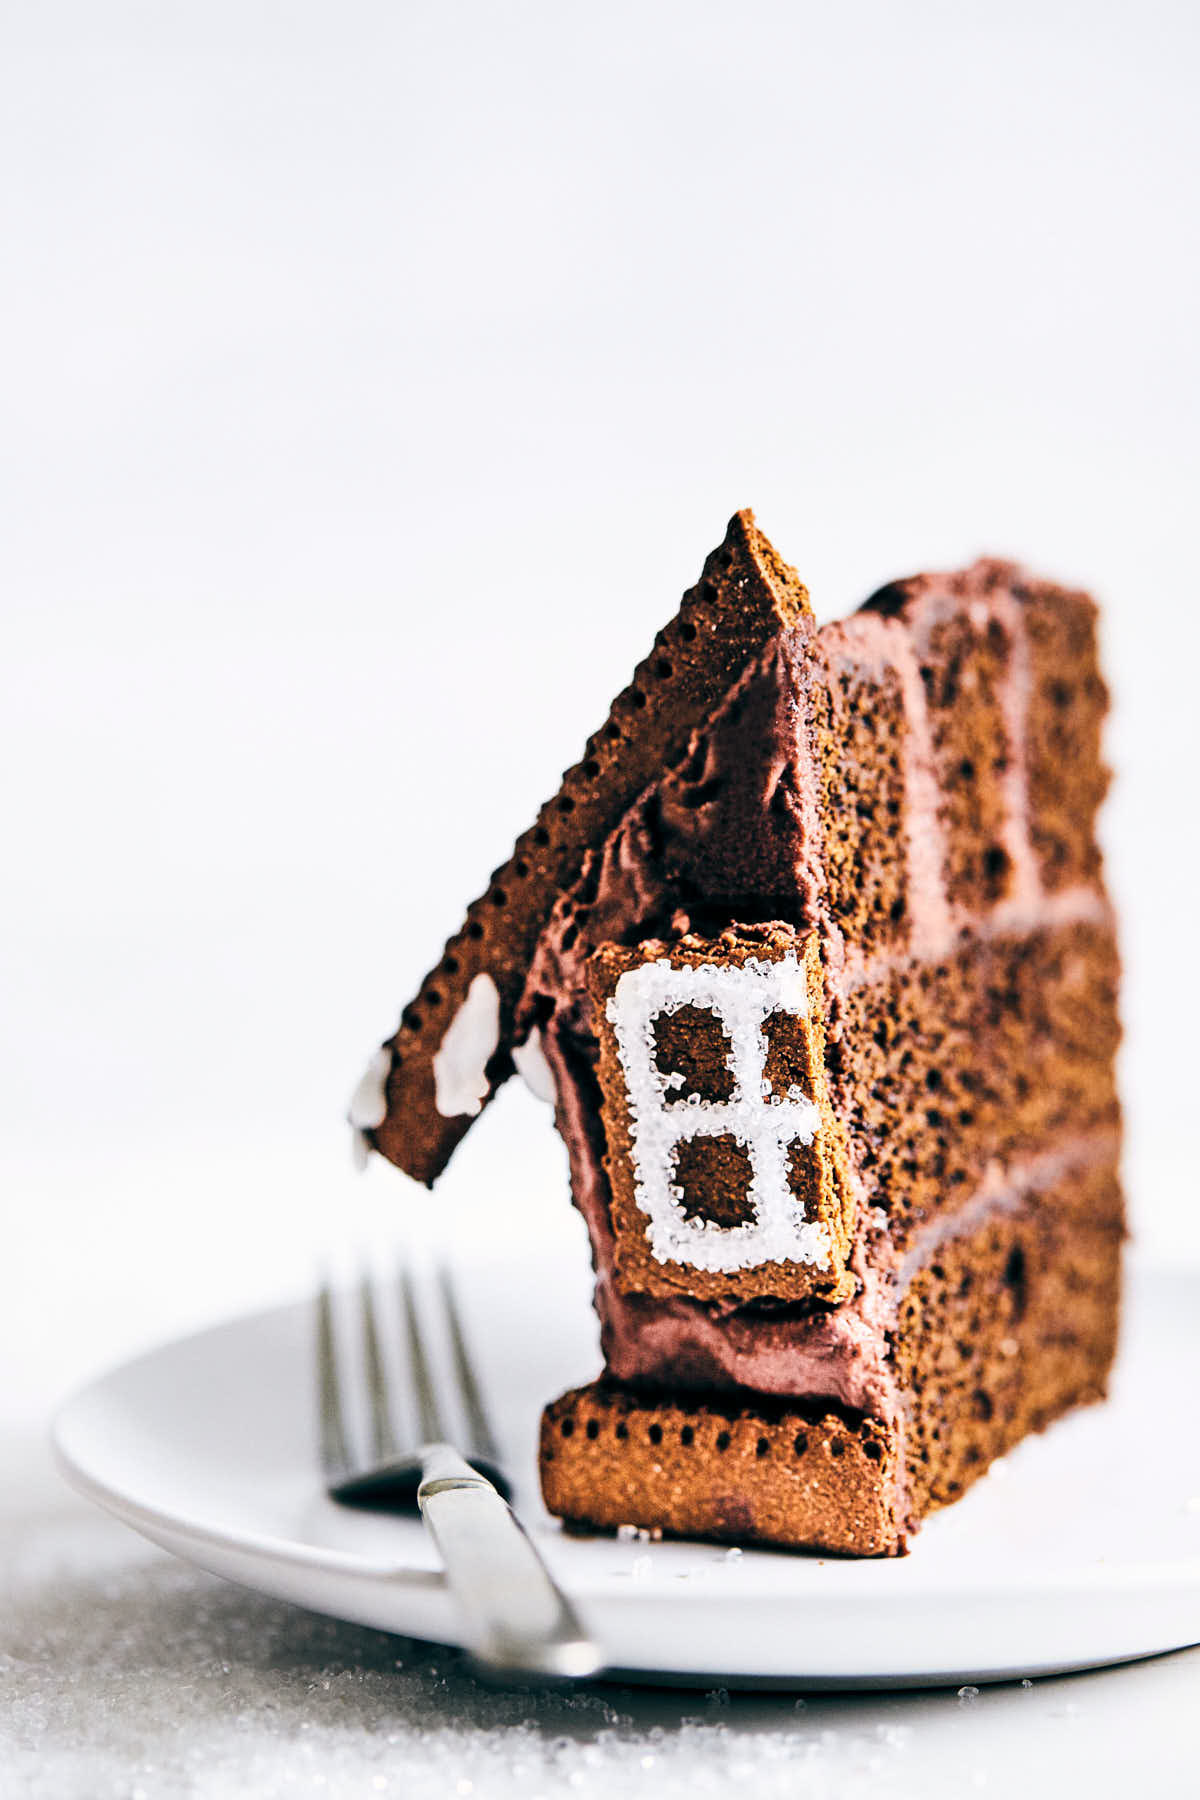 Slice of gingerbread house with a fork